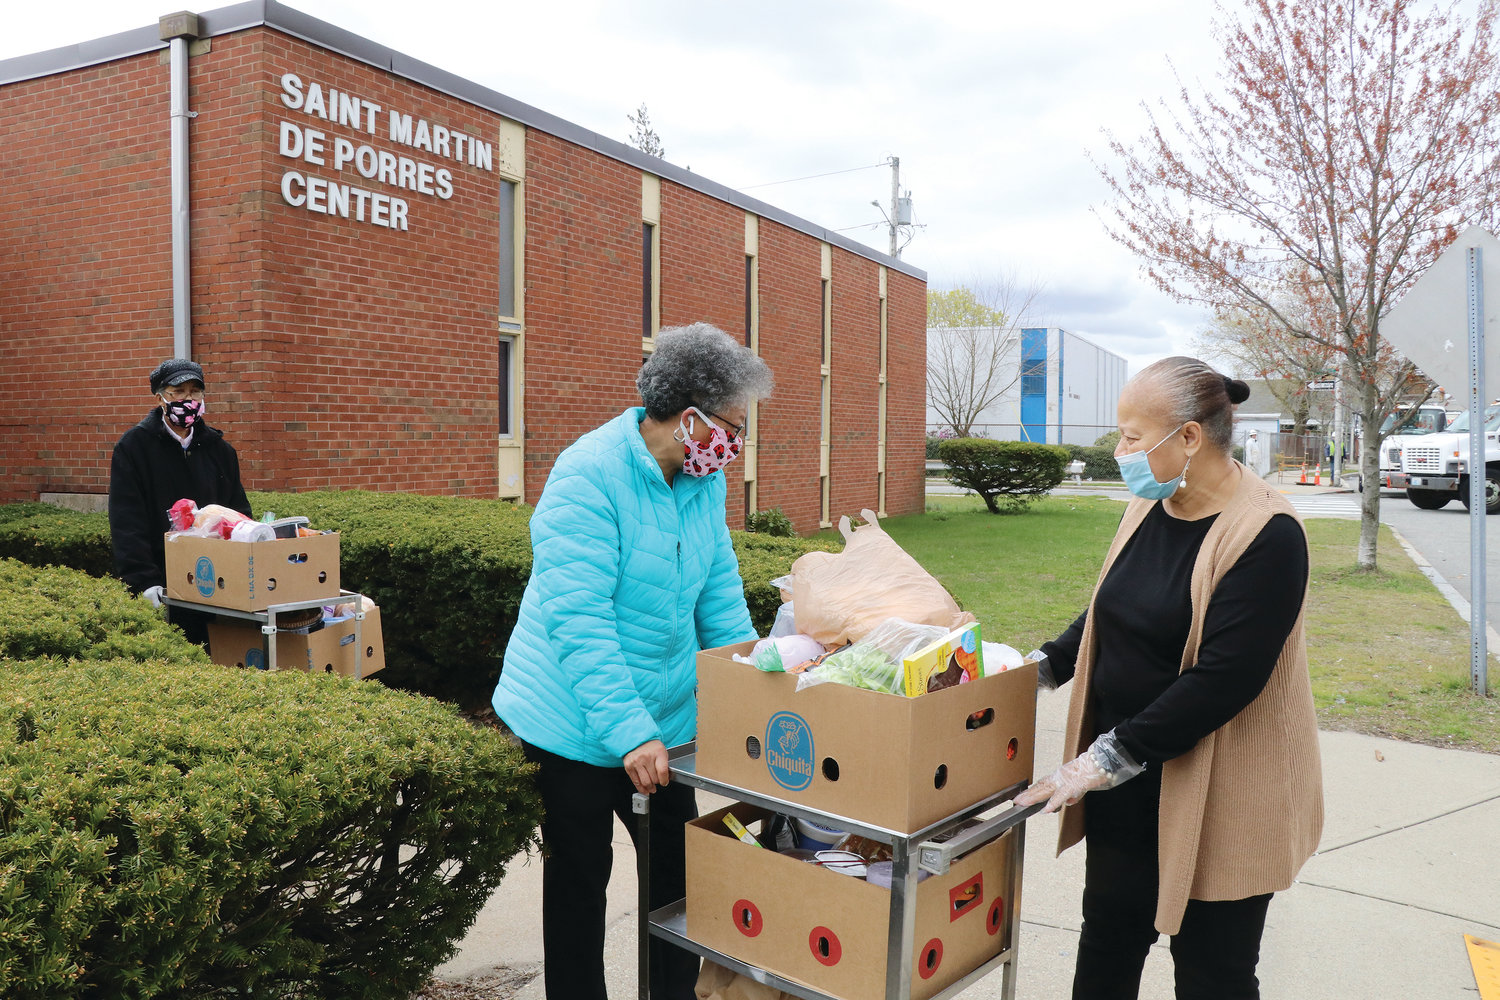 Director Linda A’Vant-Deishinni, at right, helps volunteers Cheryl Gray, left, and Gail Harris move boxes of food to their vehicle for distribution to homebound seniors in need.